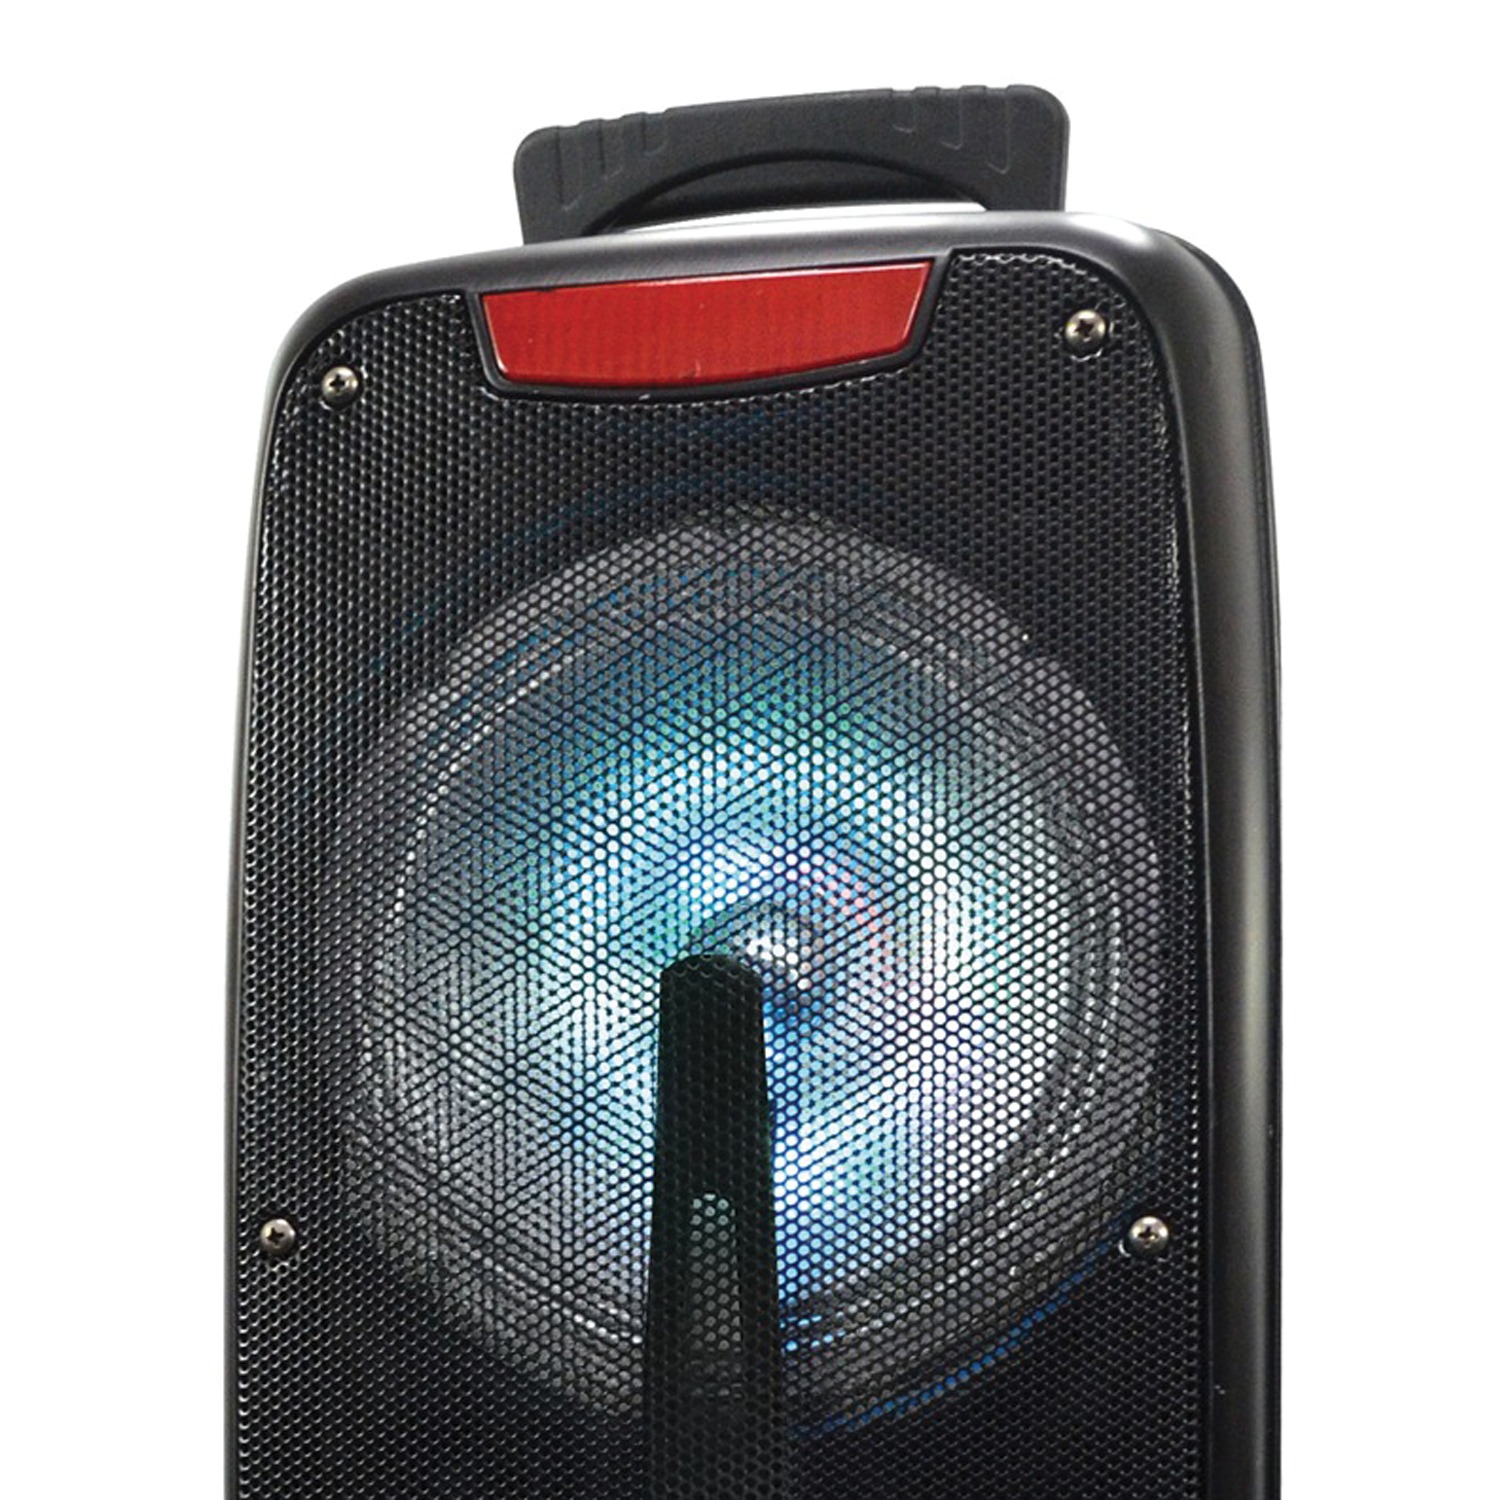 Supersonic Dual 8-inch Speaker With True Technology (black) - image 2 of 2